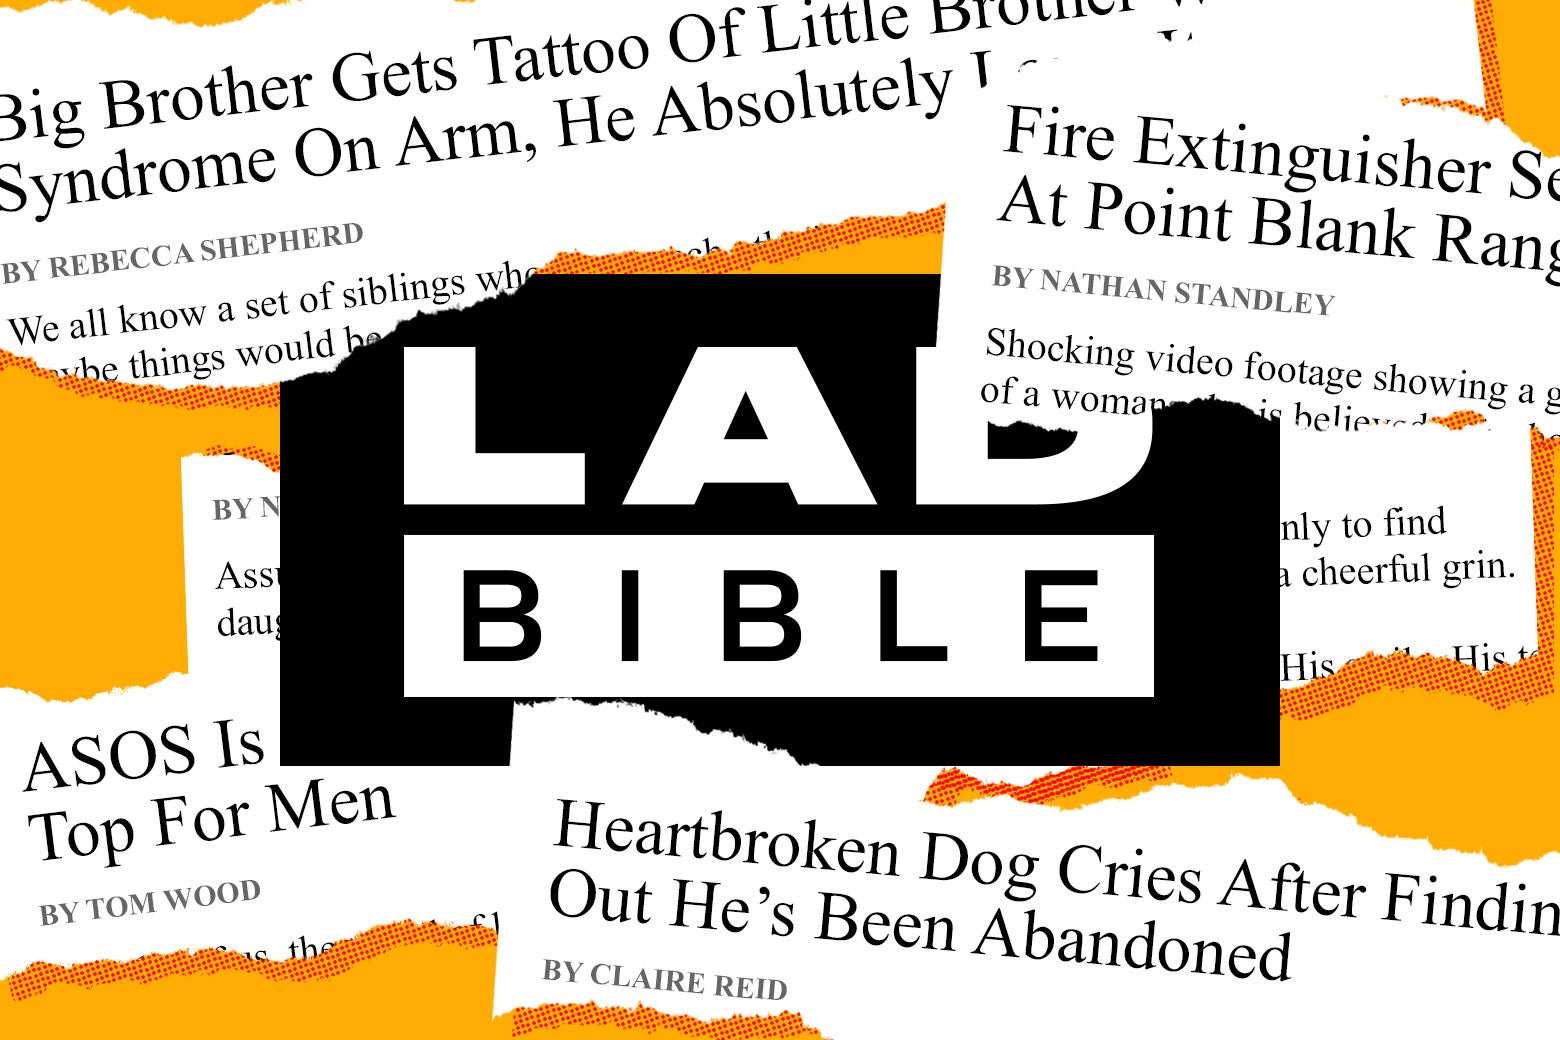 LADbible logo surrounded by newspaper-like clippings of tales from the website.